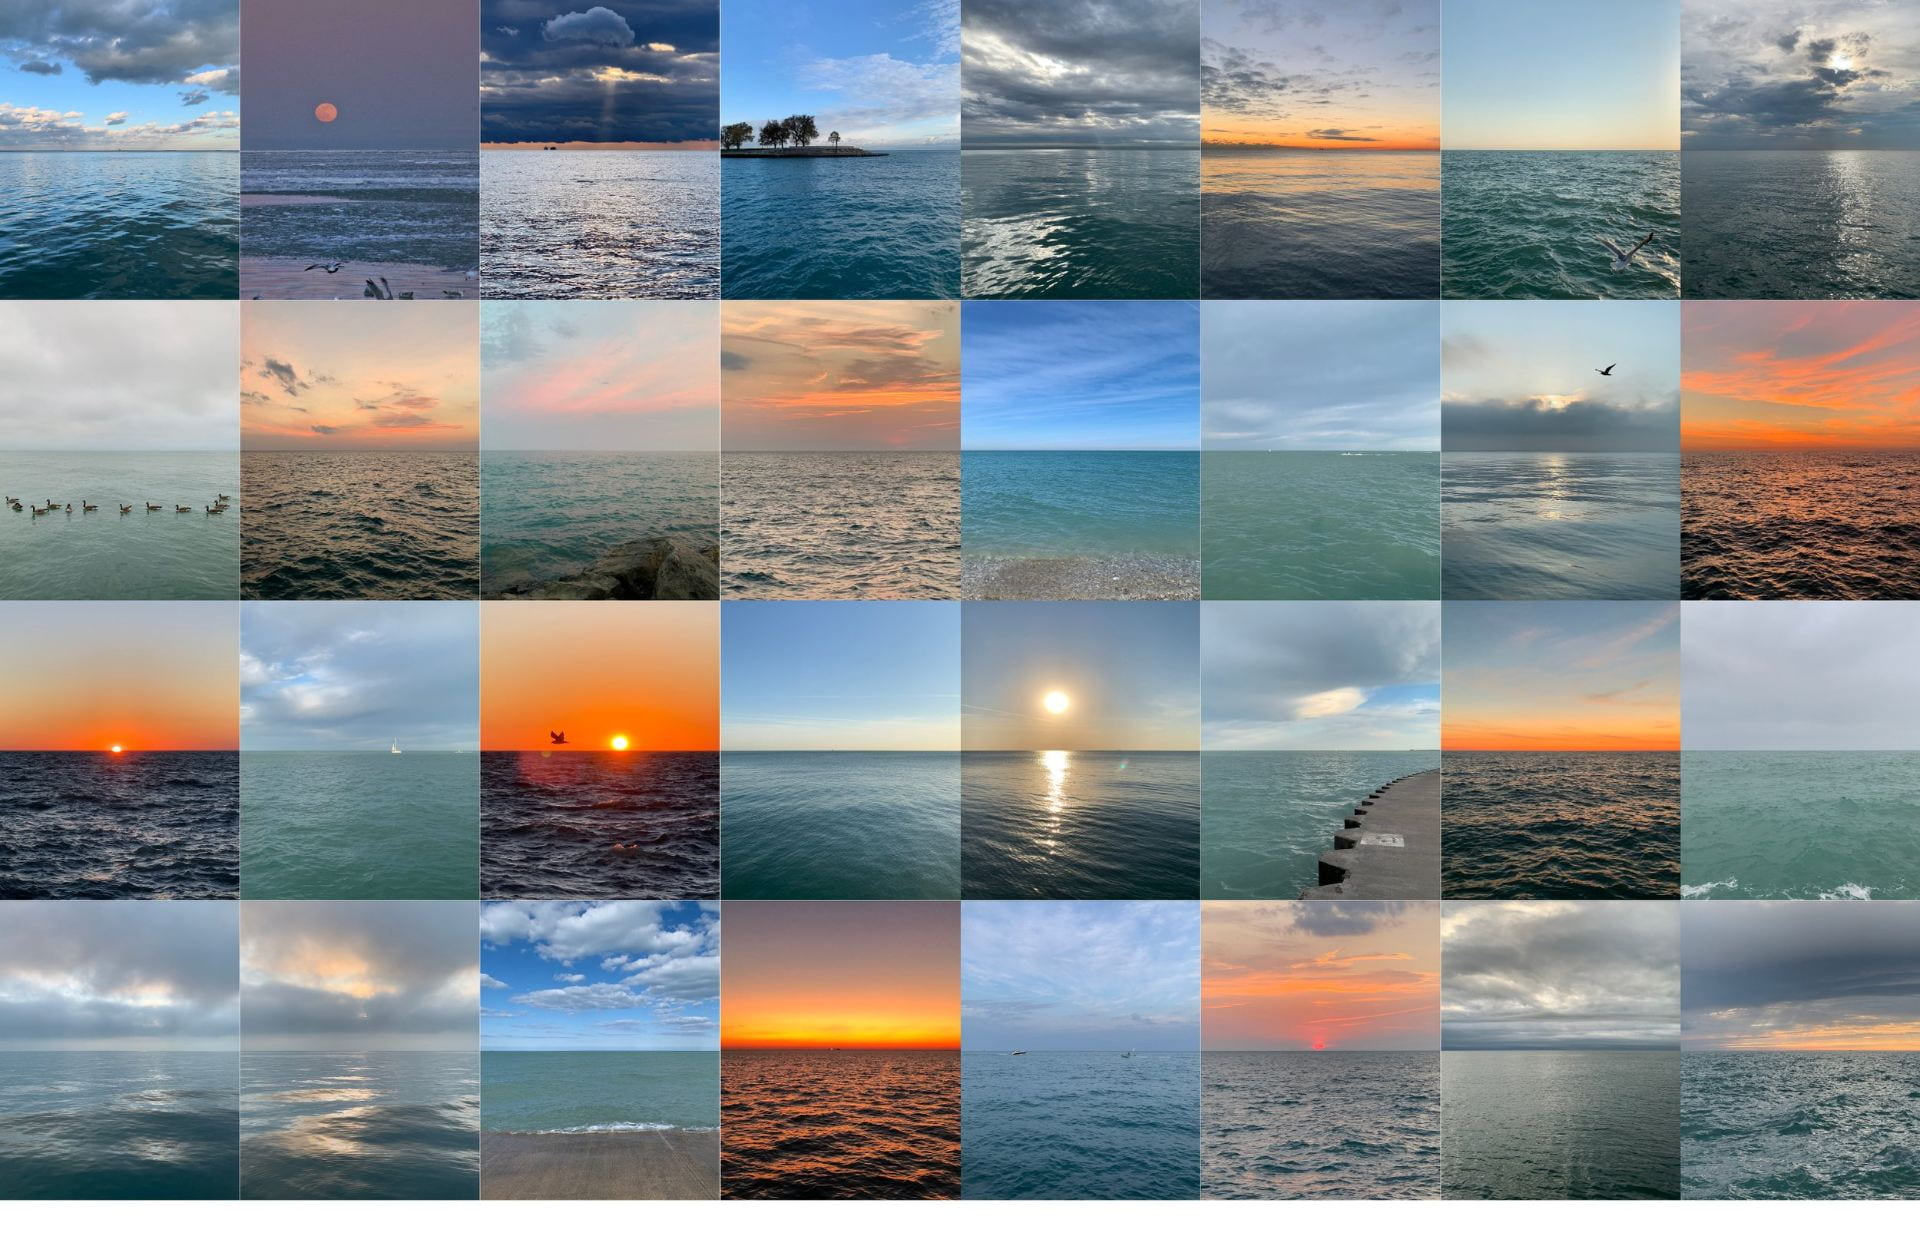 A grid of different views of the horizon of Lake Michigan